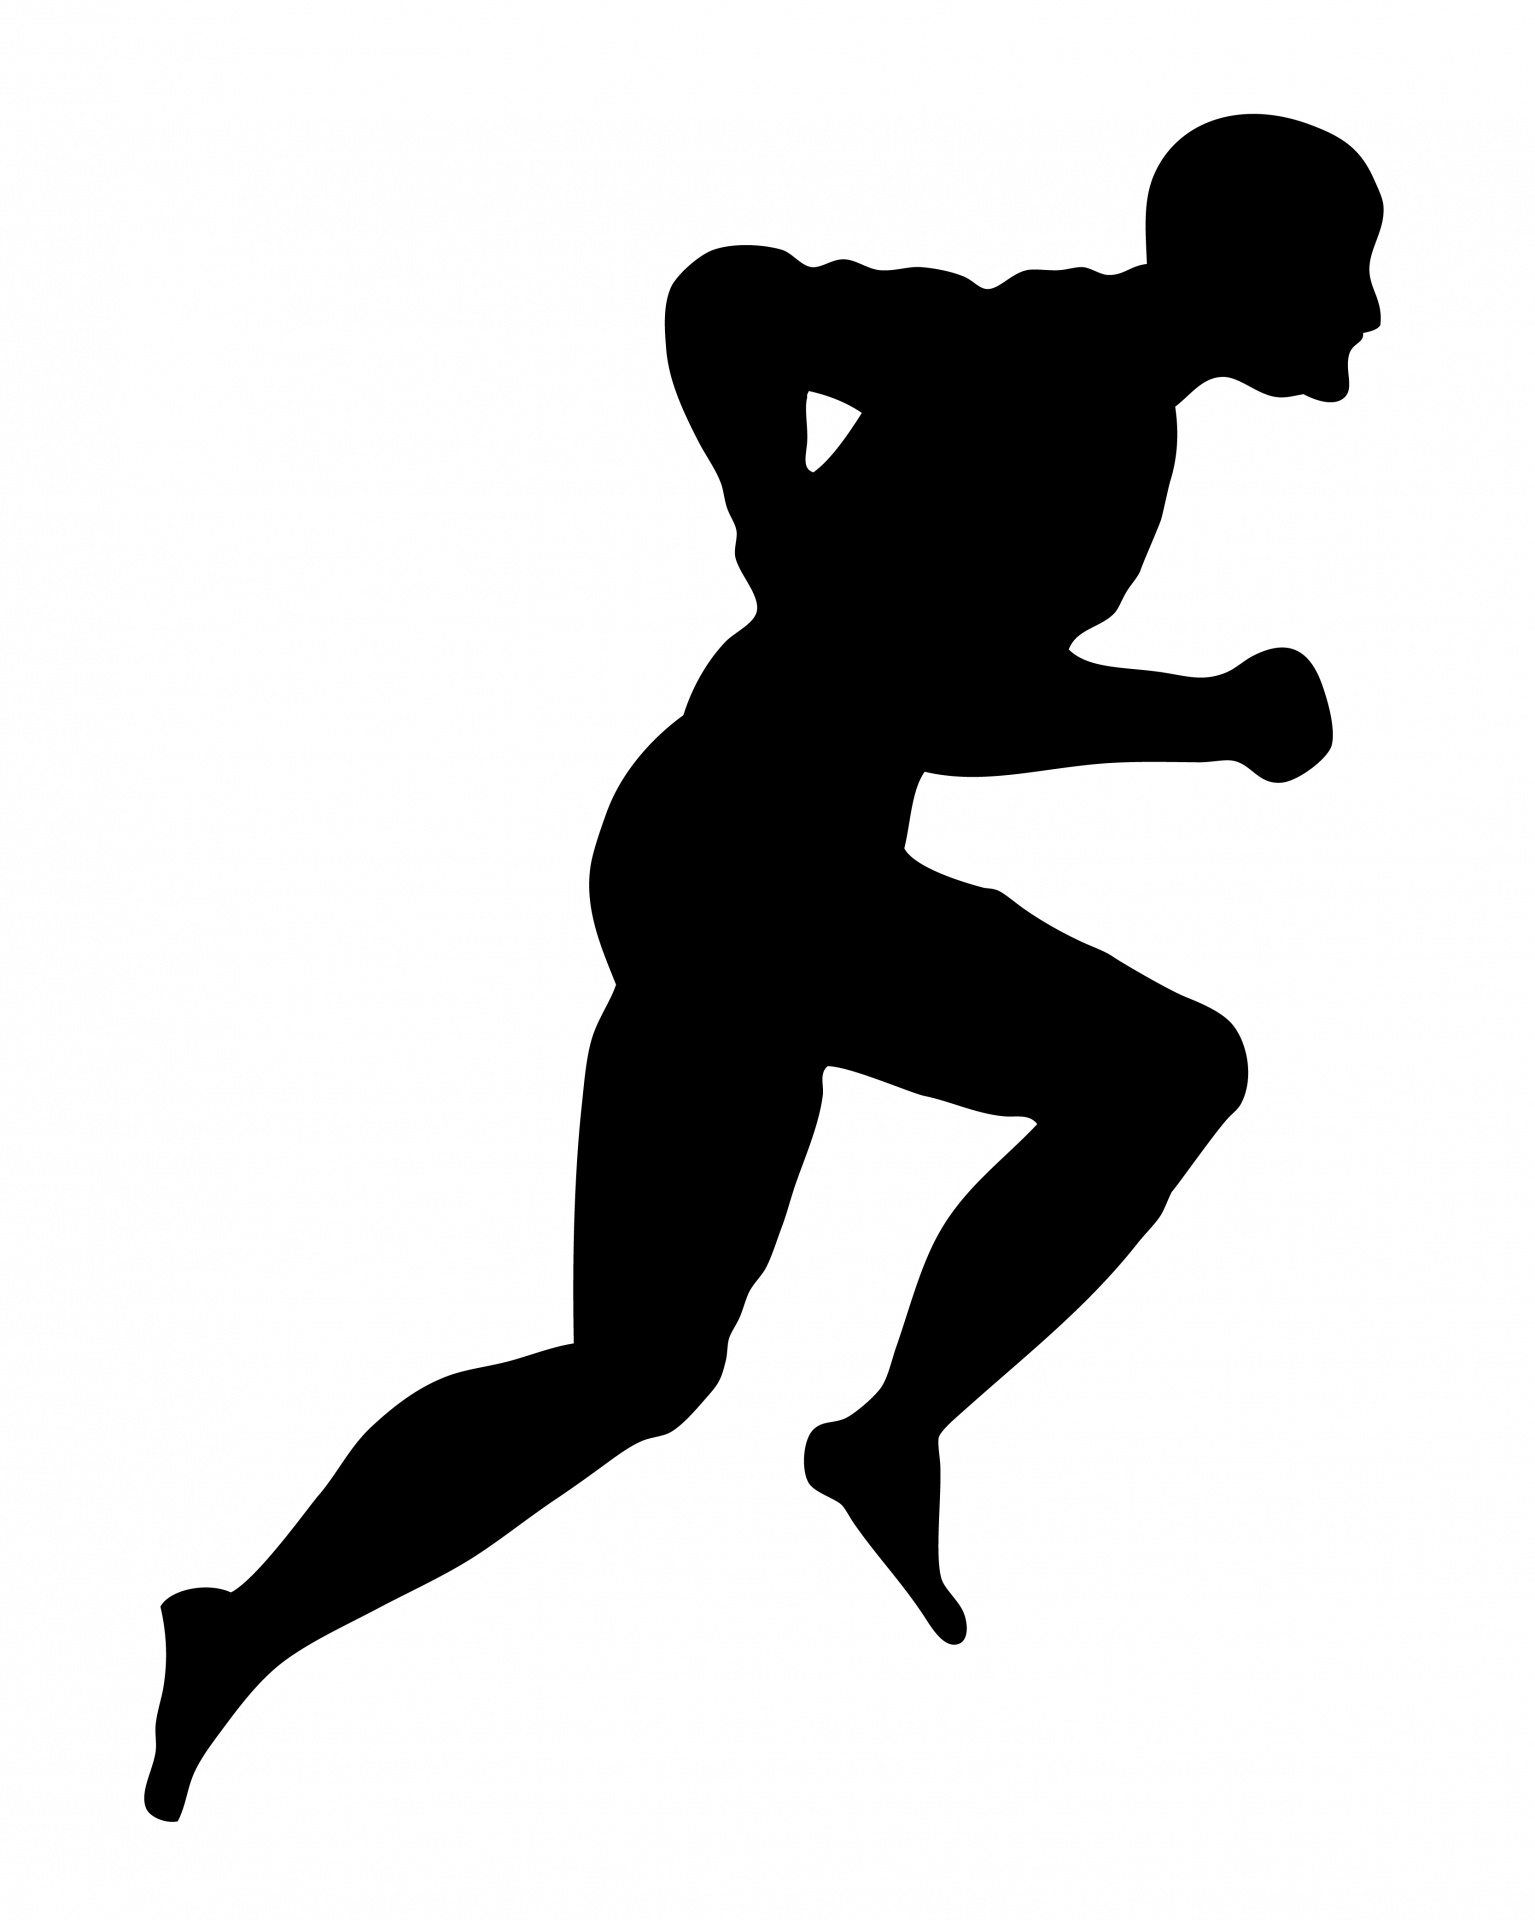 Athlete clipart silhouette. Running man free stock